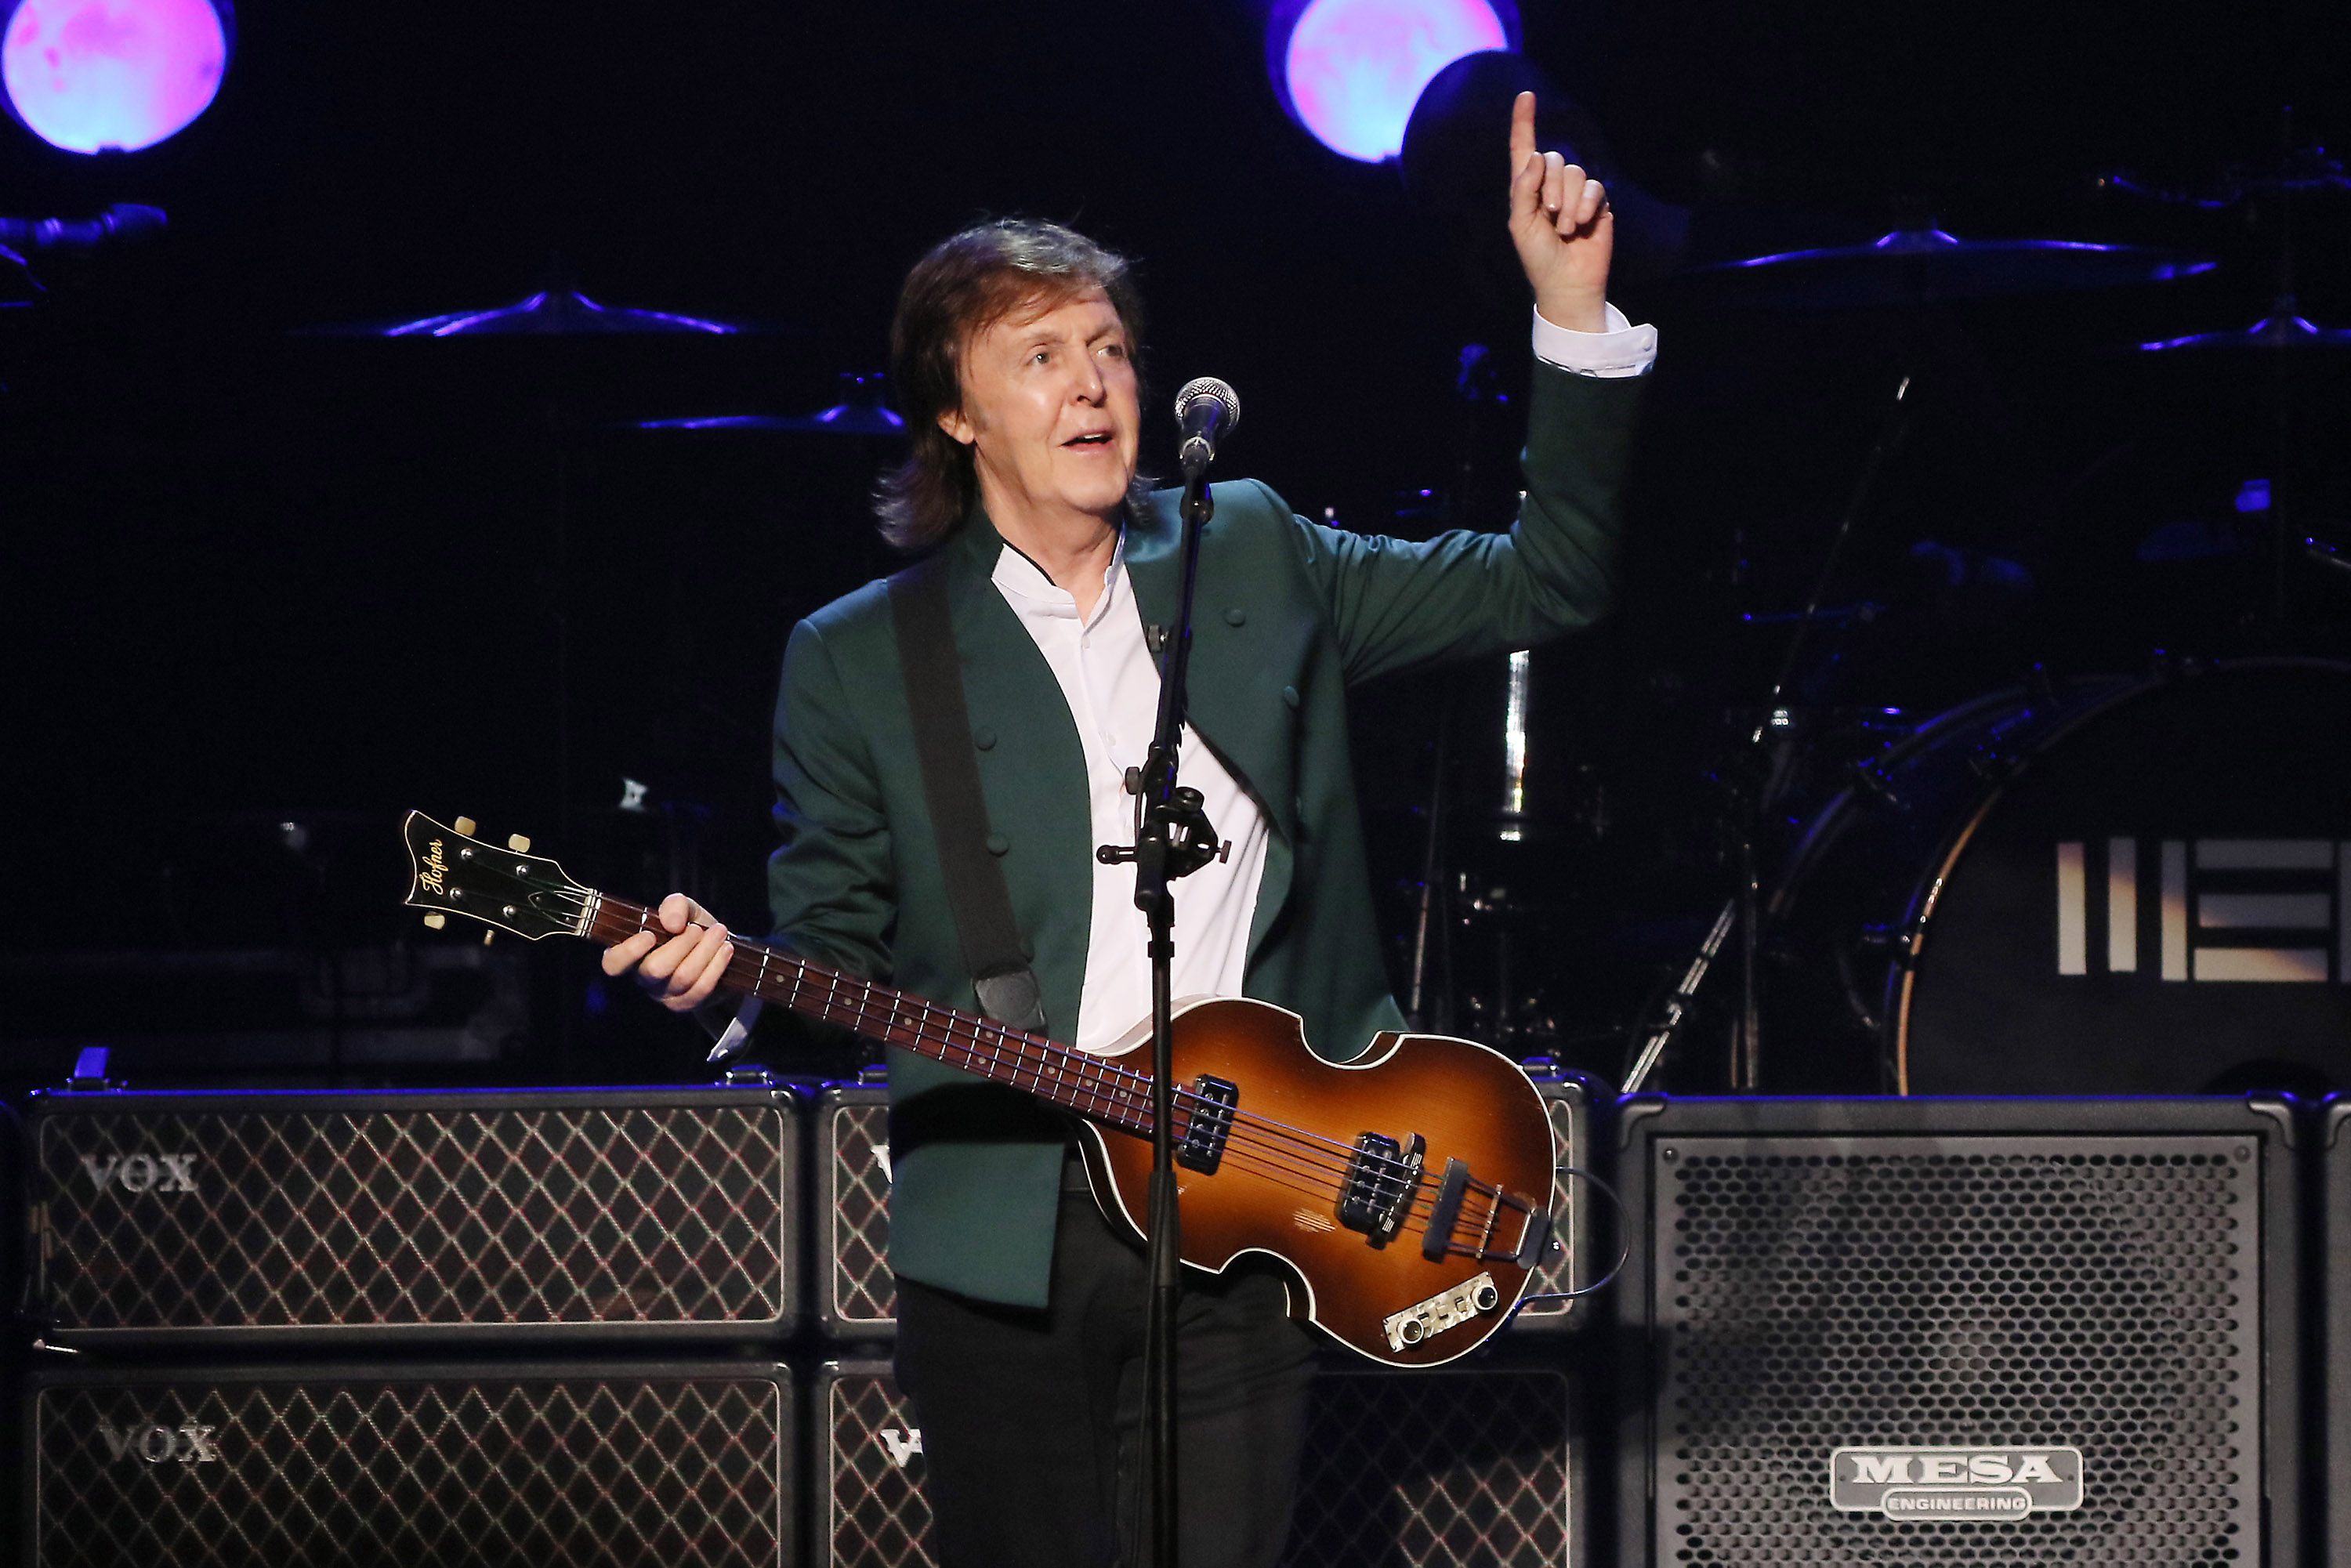 Paul McCartney performs live at the Budokan on April 28, 2015 in Tokyo.